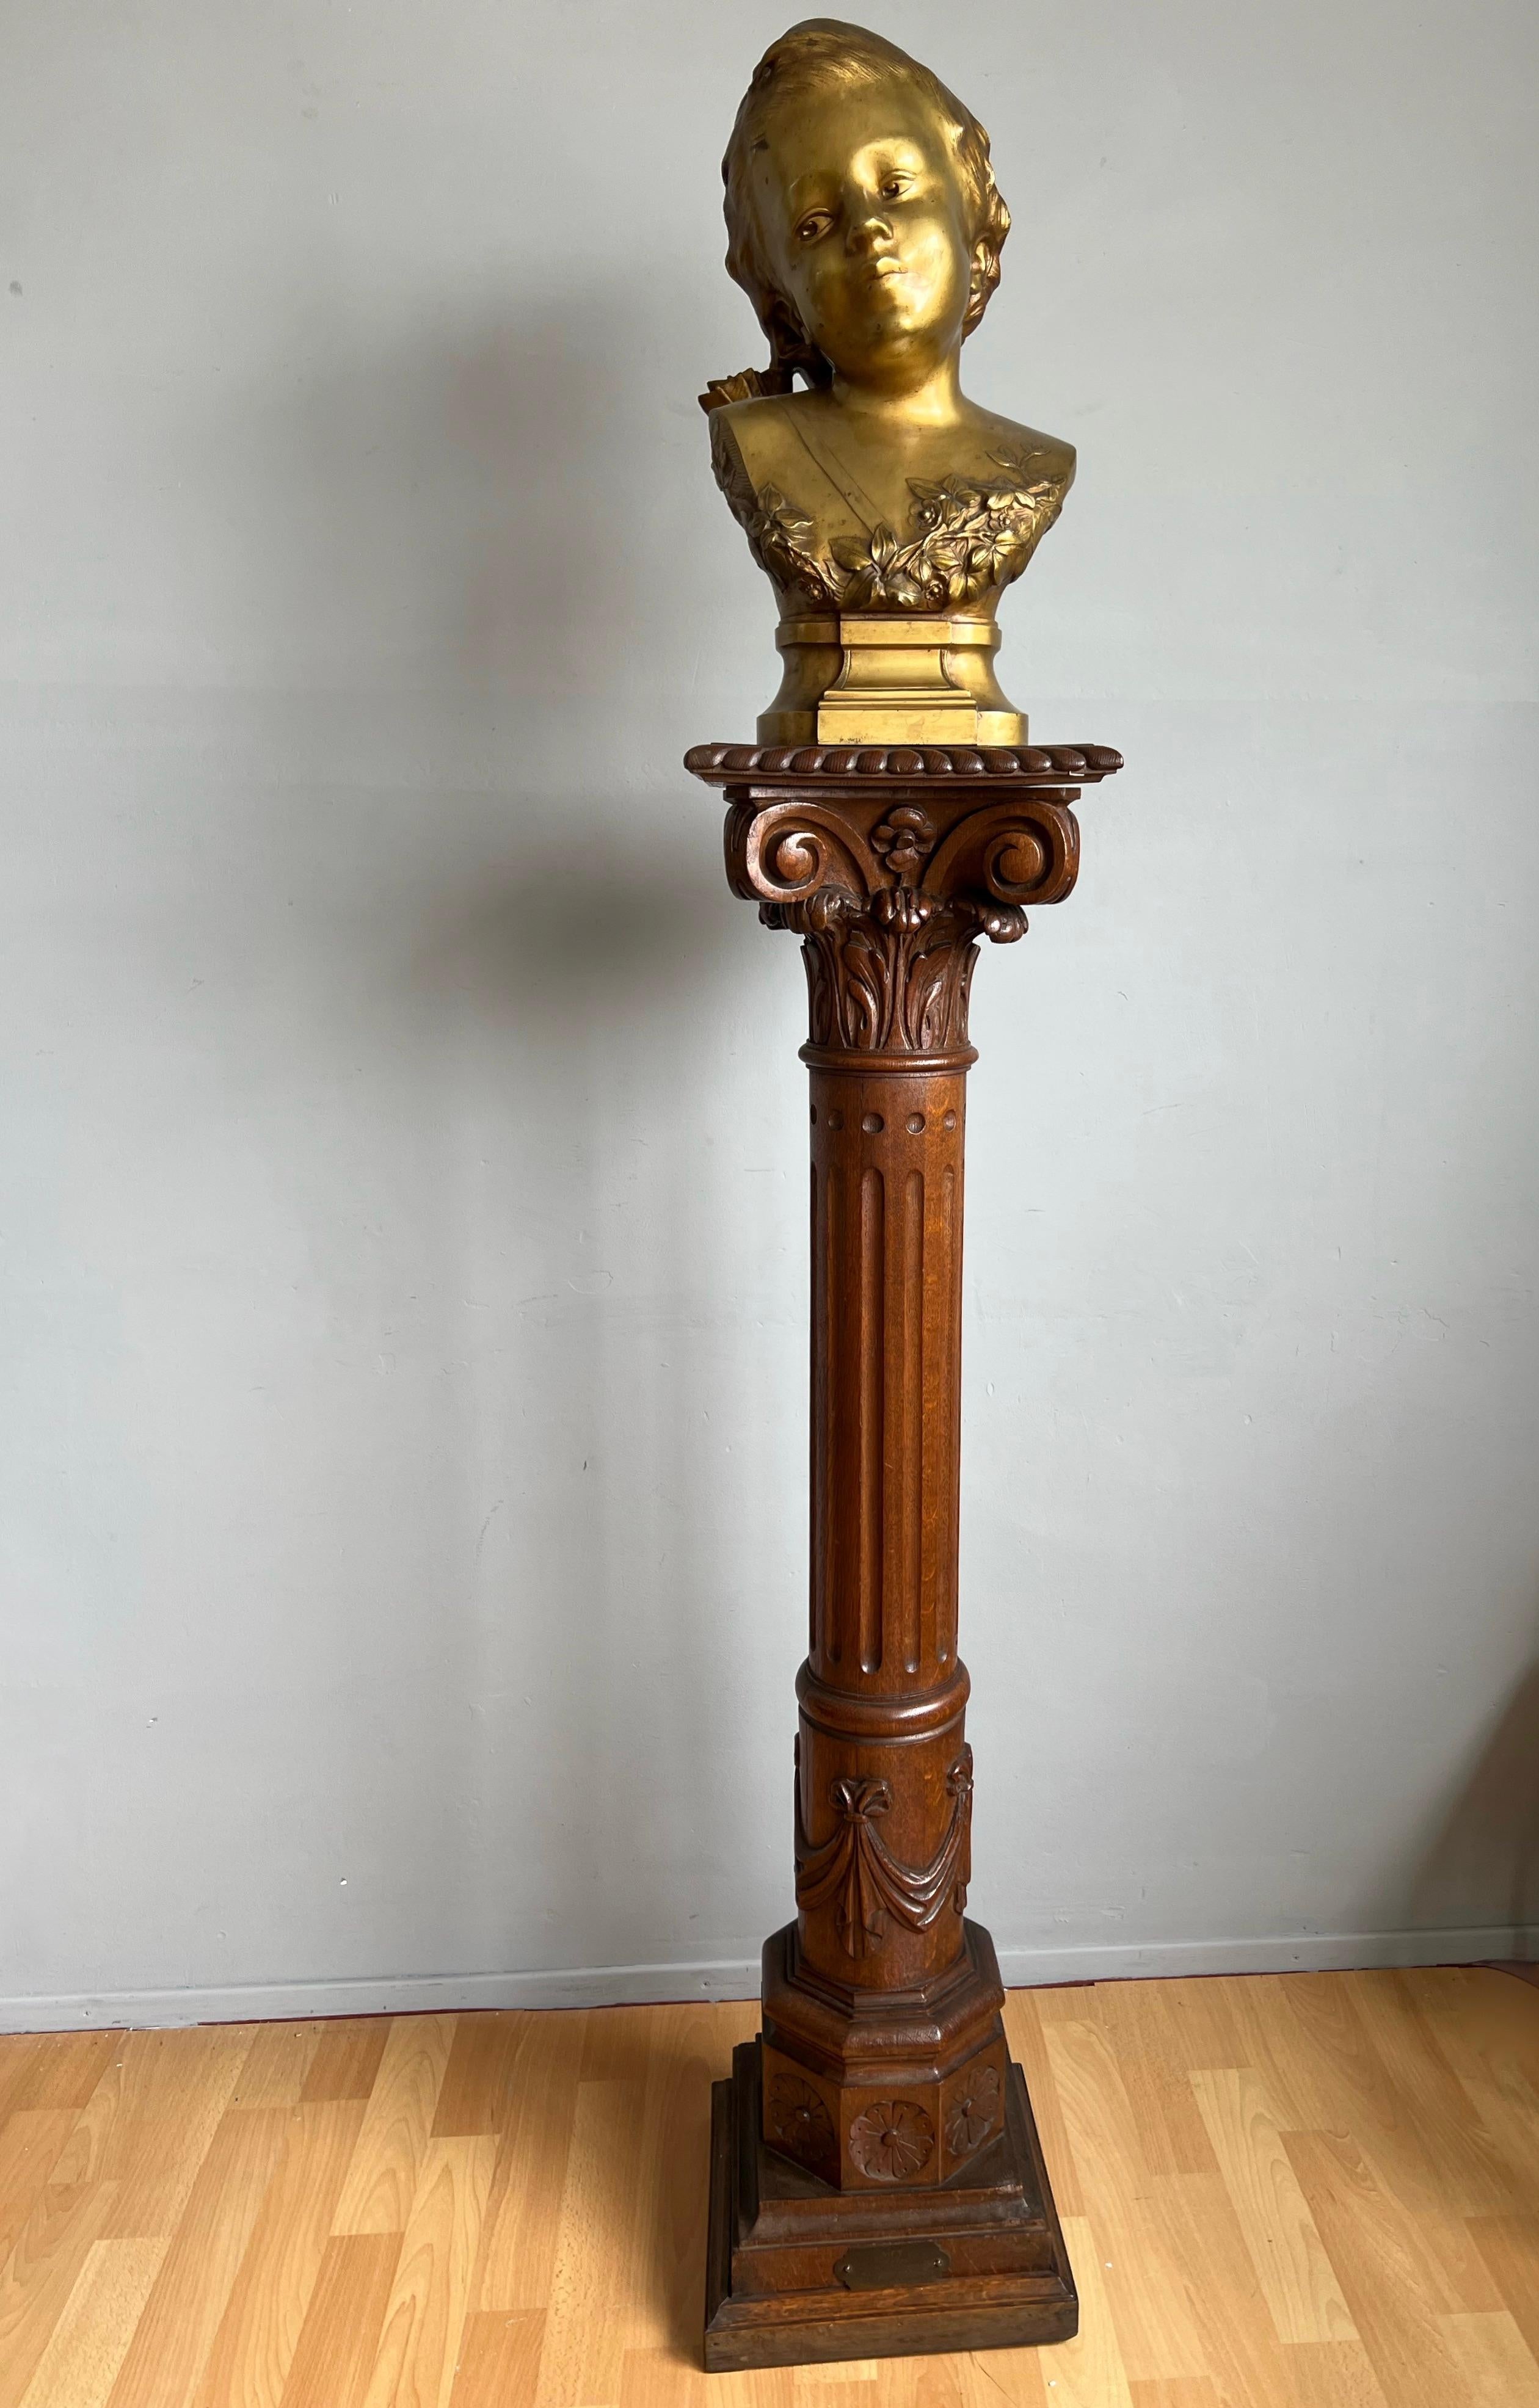 Stunning classical style display column with a wonderful and warm patina.

This marvelous piece of early 20th century workmanship is another fine example of the quality that was made in those days. All handcrafted out of oak and beautifully